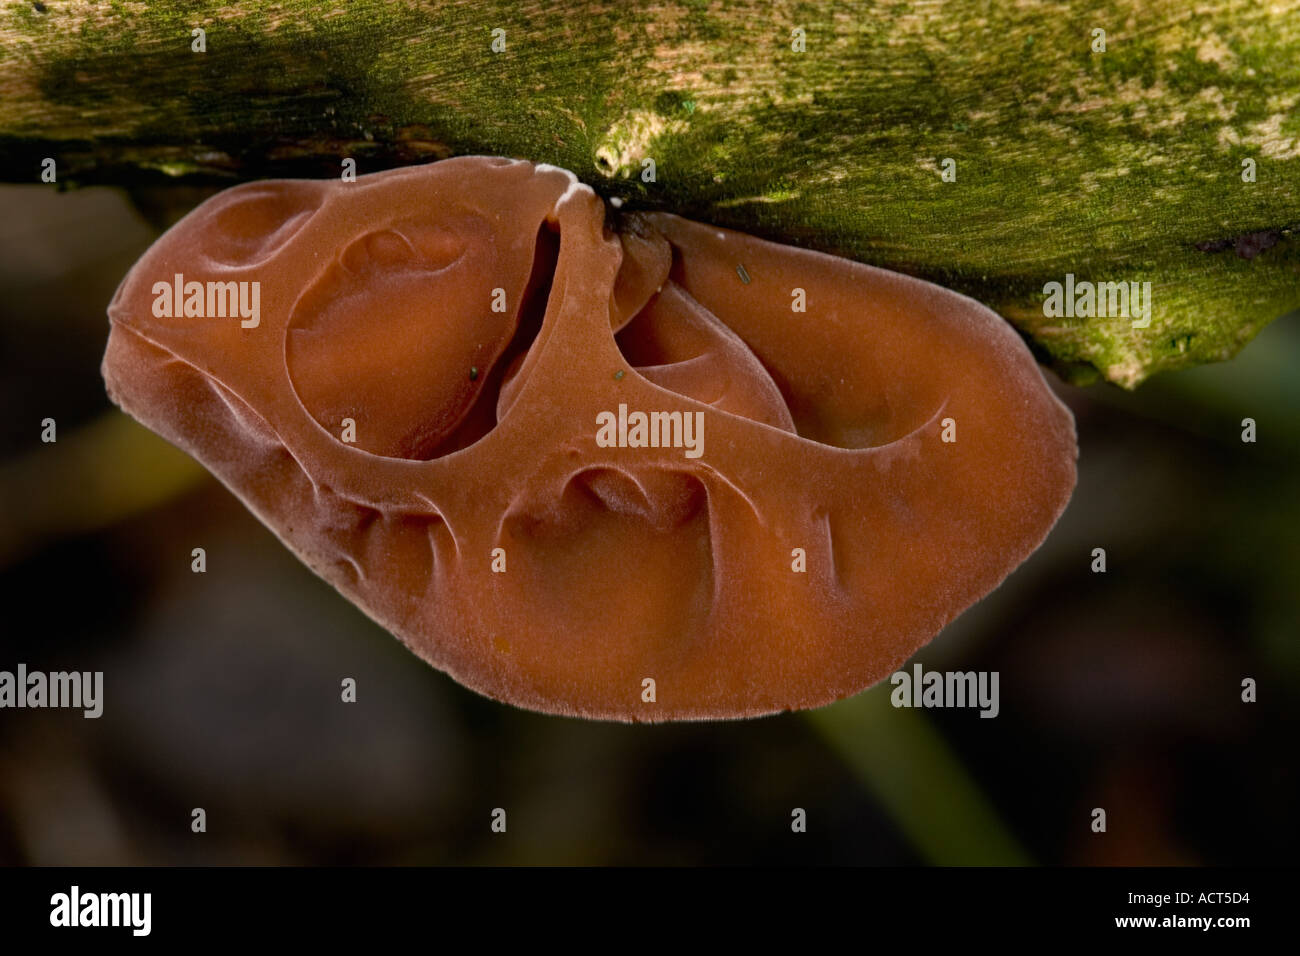 Jews Ear Auricularia auricula judae close up view showing textured cap potton bedfordshire Stock Photo